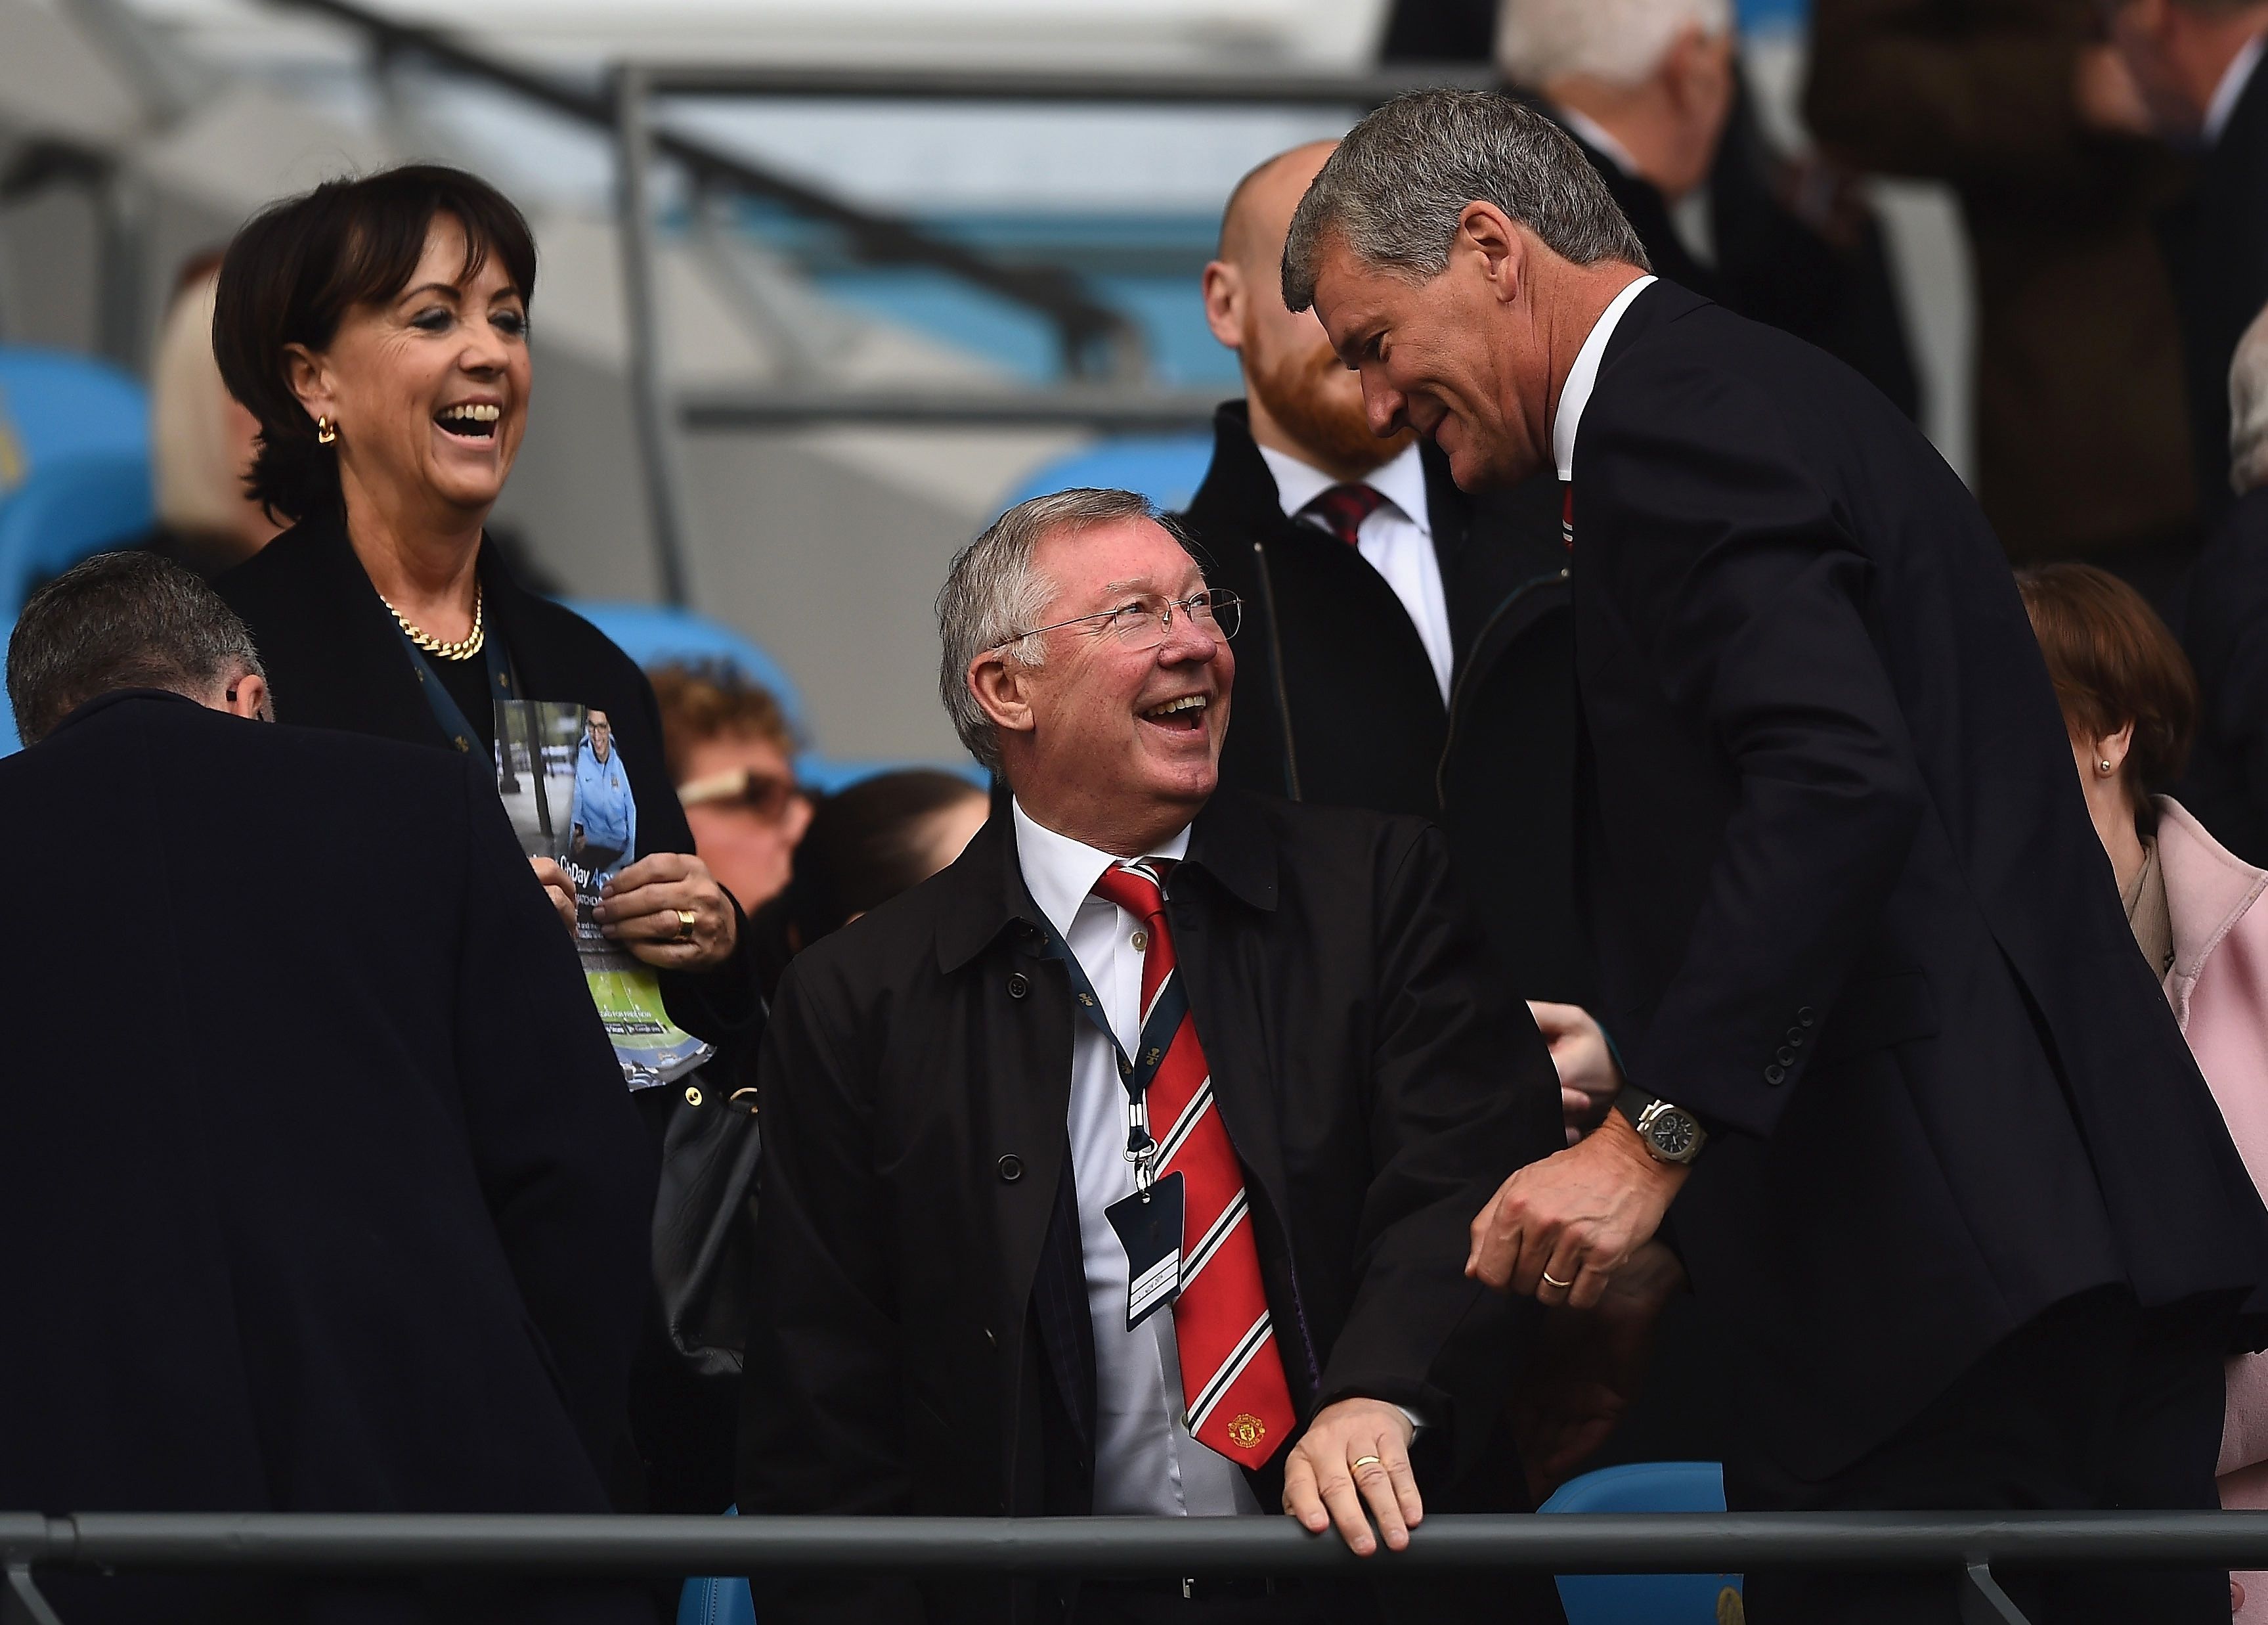 MANCHESTER, ENGLAND - NOVEMBER 02: Sir Alex Ferguson (C) smiles at David Gill, former chief executive of Manchester United during the Barclays Premier League match between Manchester City and Manchester United at Etihad Stadium on November 2, 2014 in Manchester, England. (Photo by Laurence Griffiths/Getty Images)